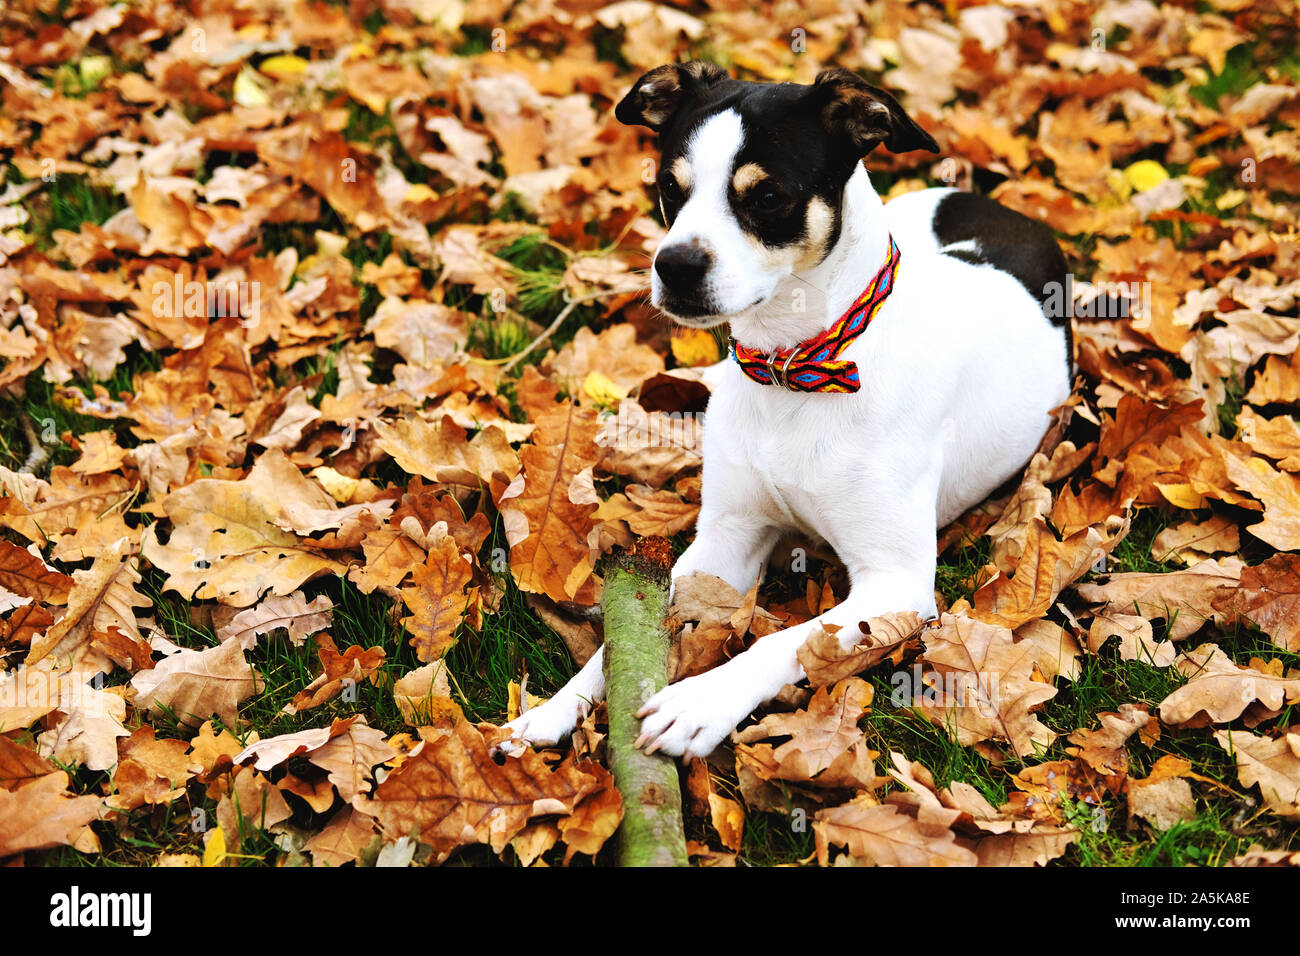 Cute cane palying in caduta foglie nel parco in autunno. Foto Stock